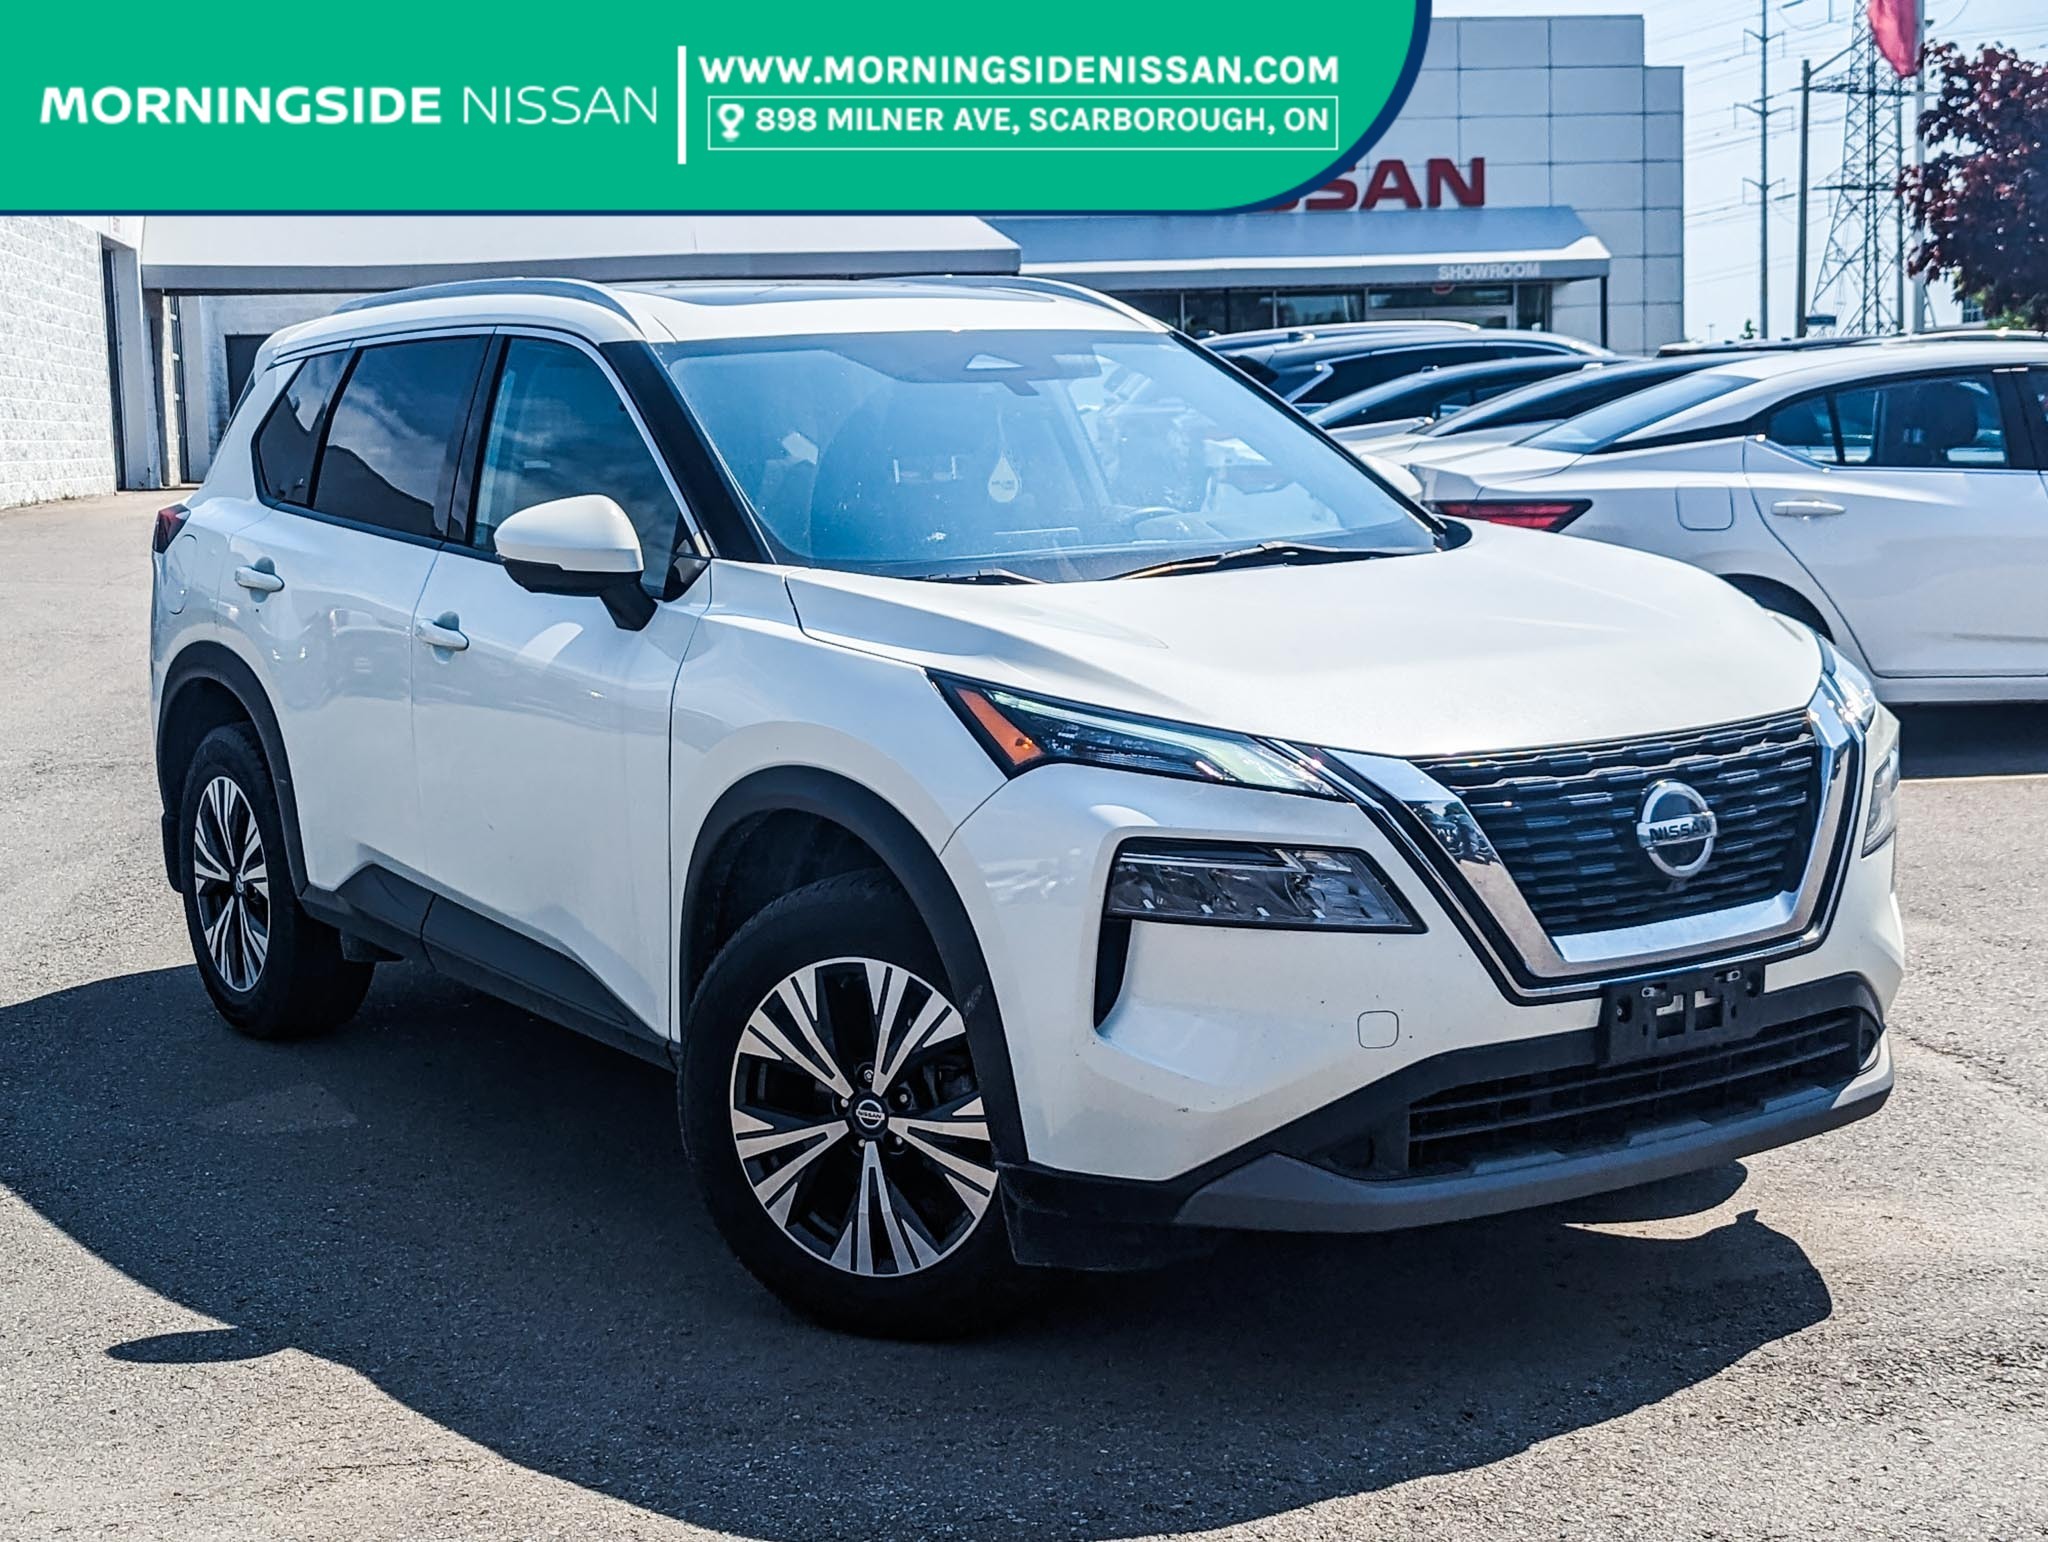 2021 Nissan Rogue SV AWD|NO ACCIDENT|ONE OWNER|